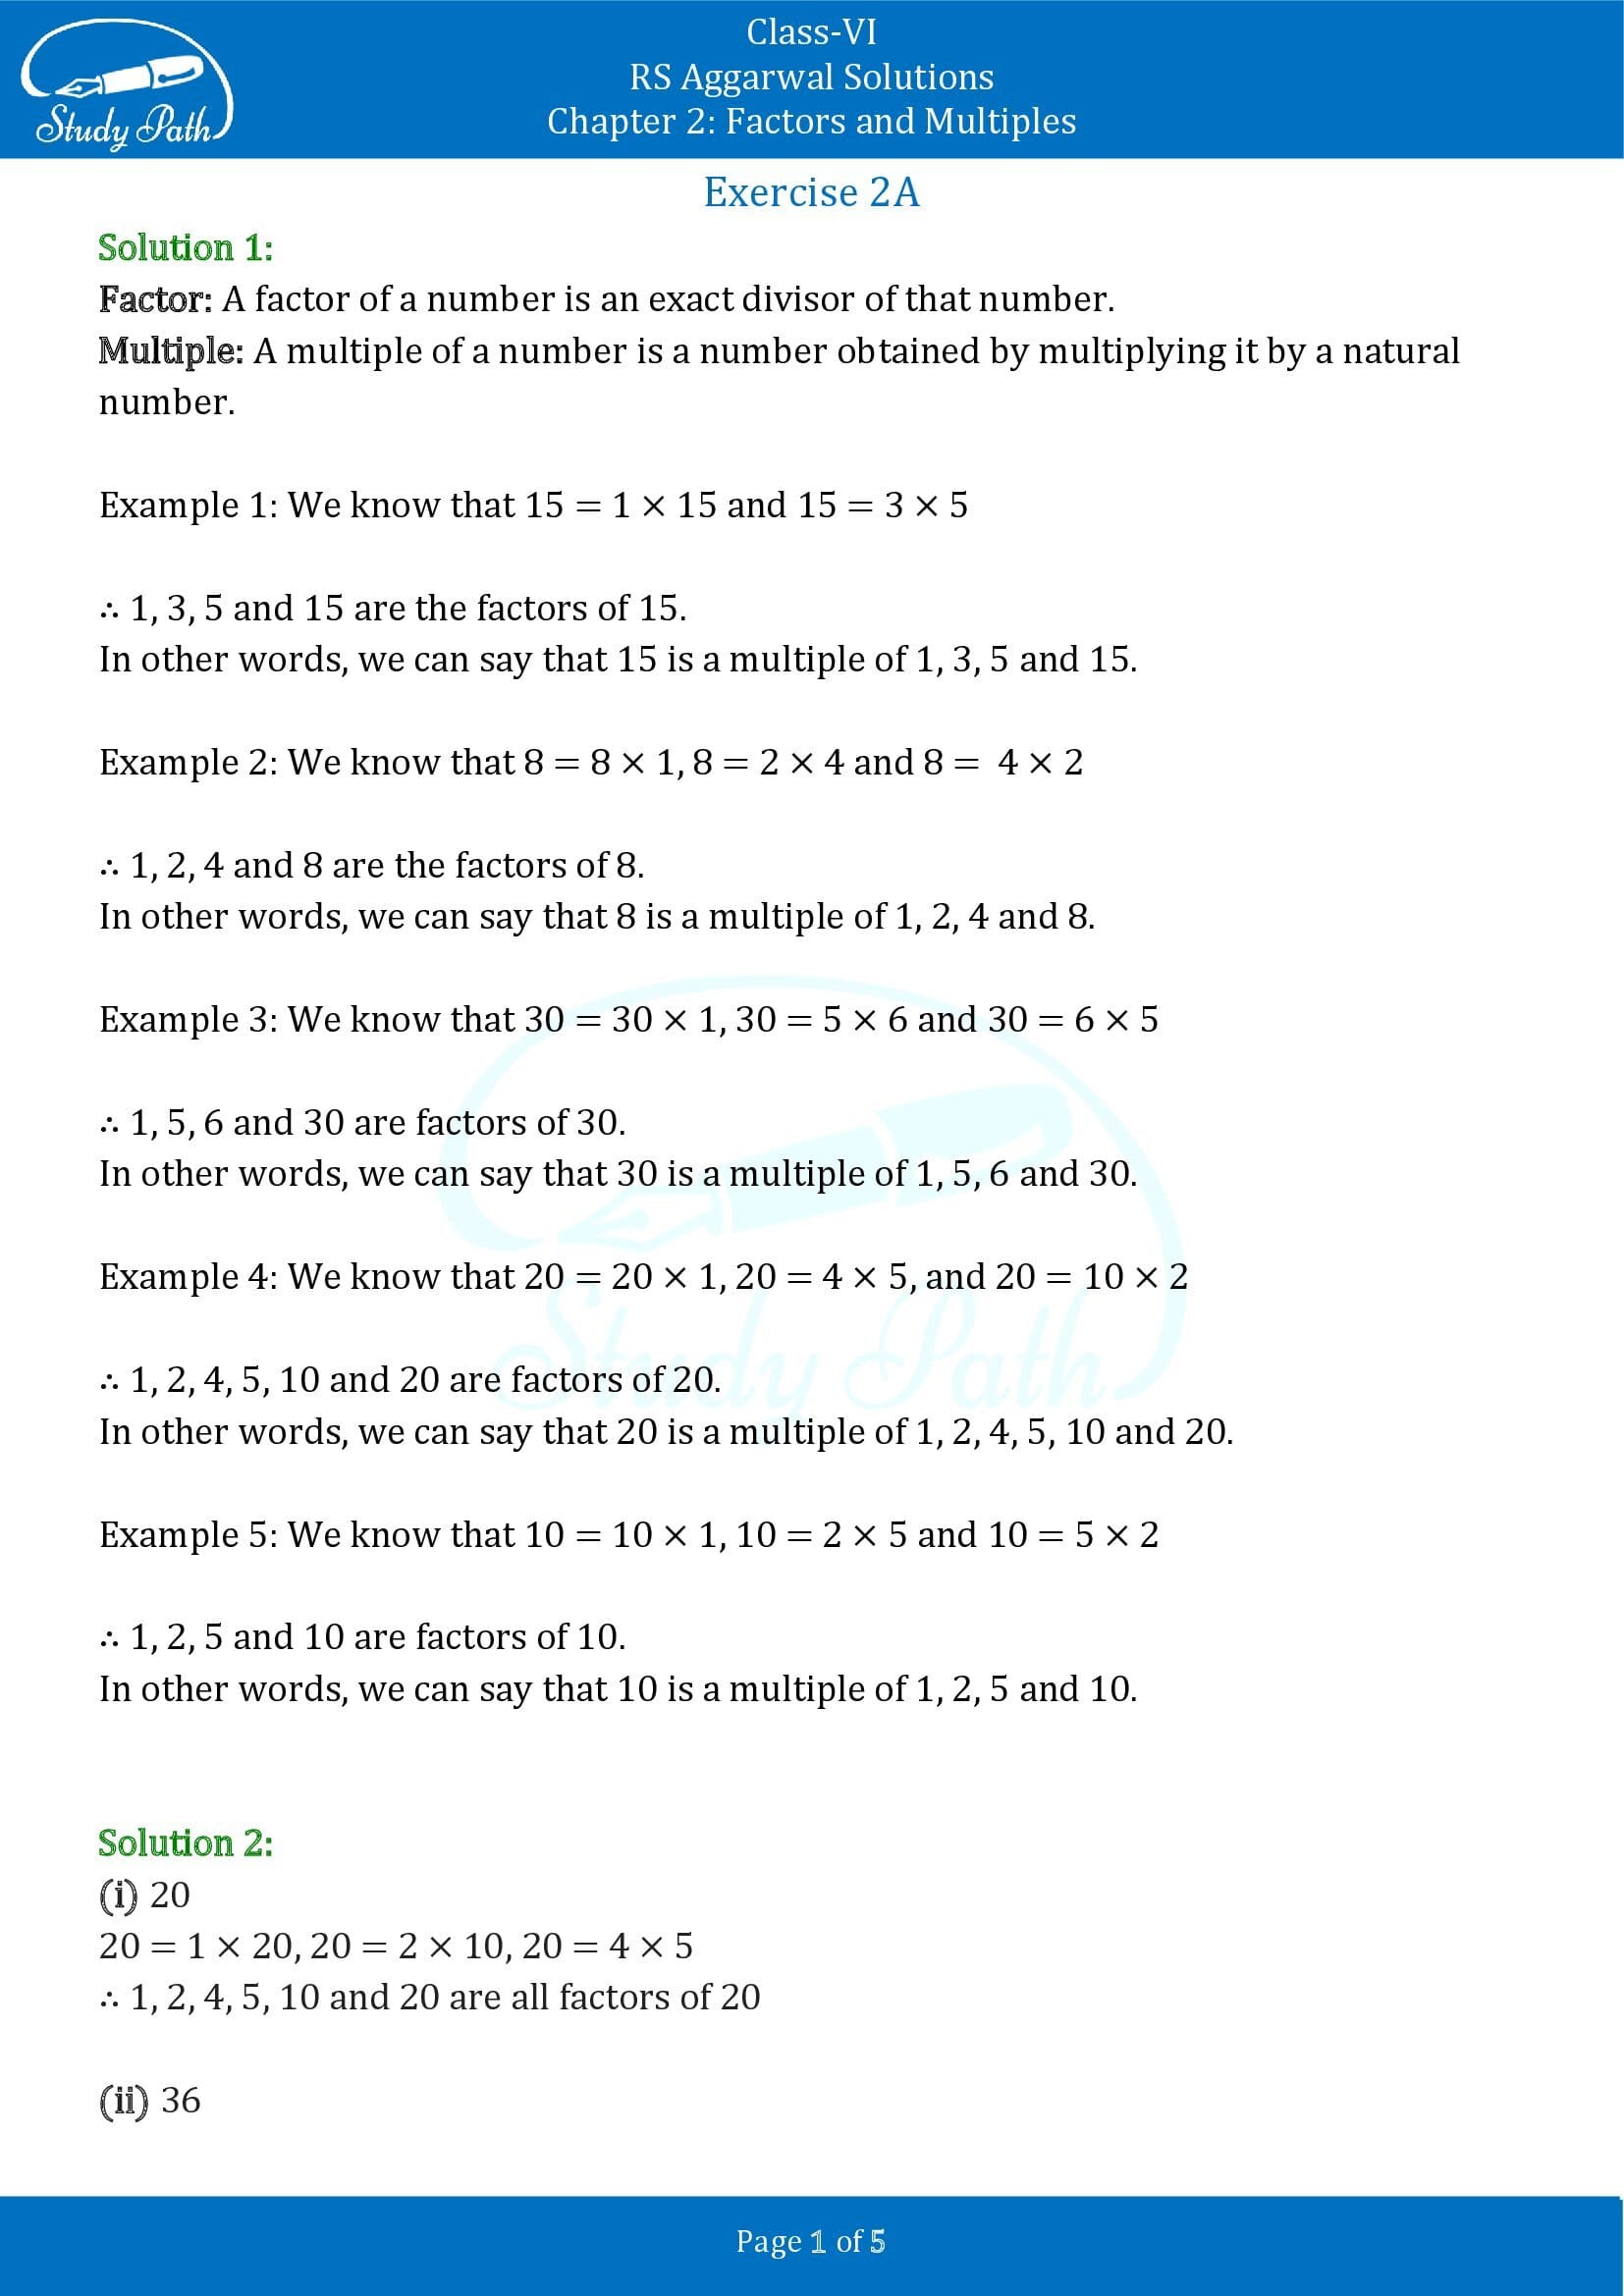 RS Aggarwal Solutions Class 6 Chapter 2 Factors and Multiples Exercise 2A 00001